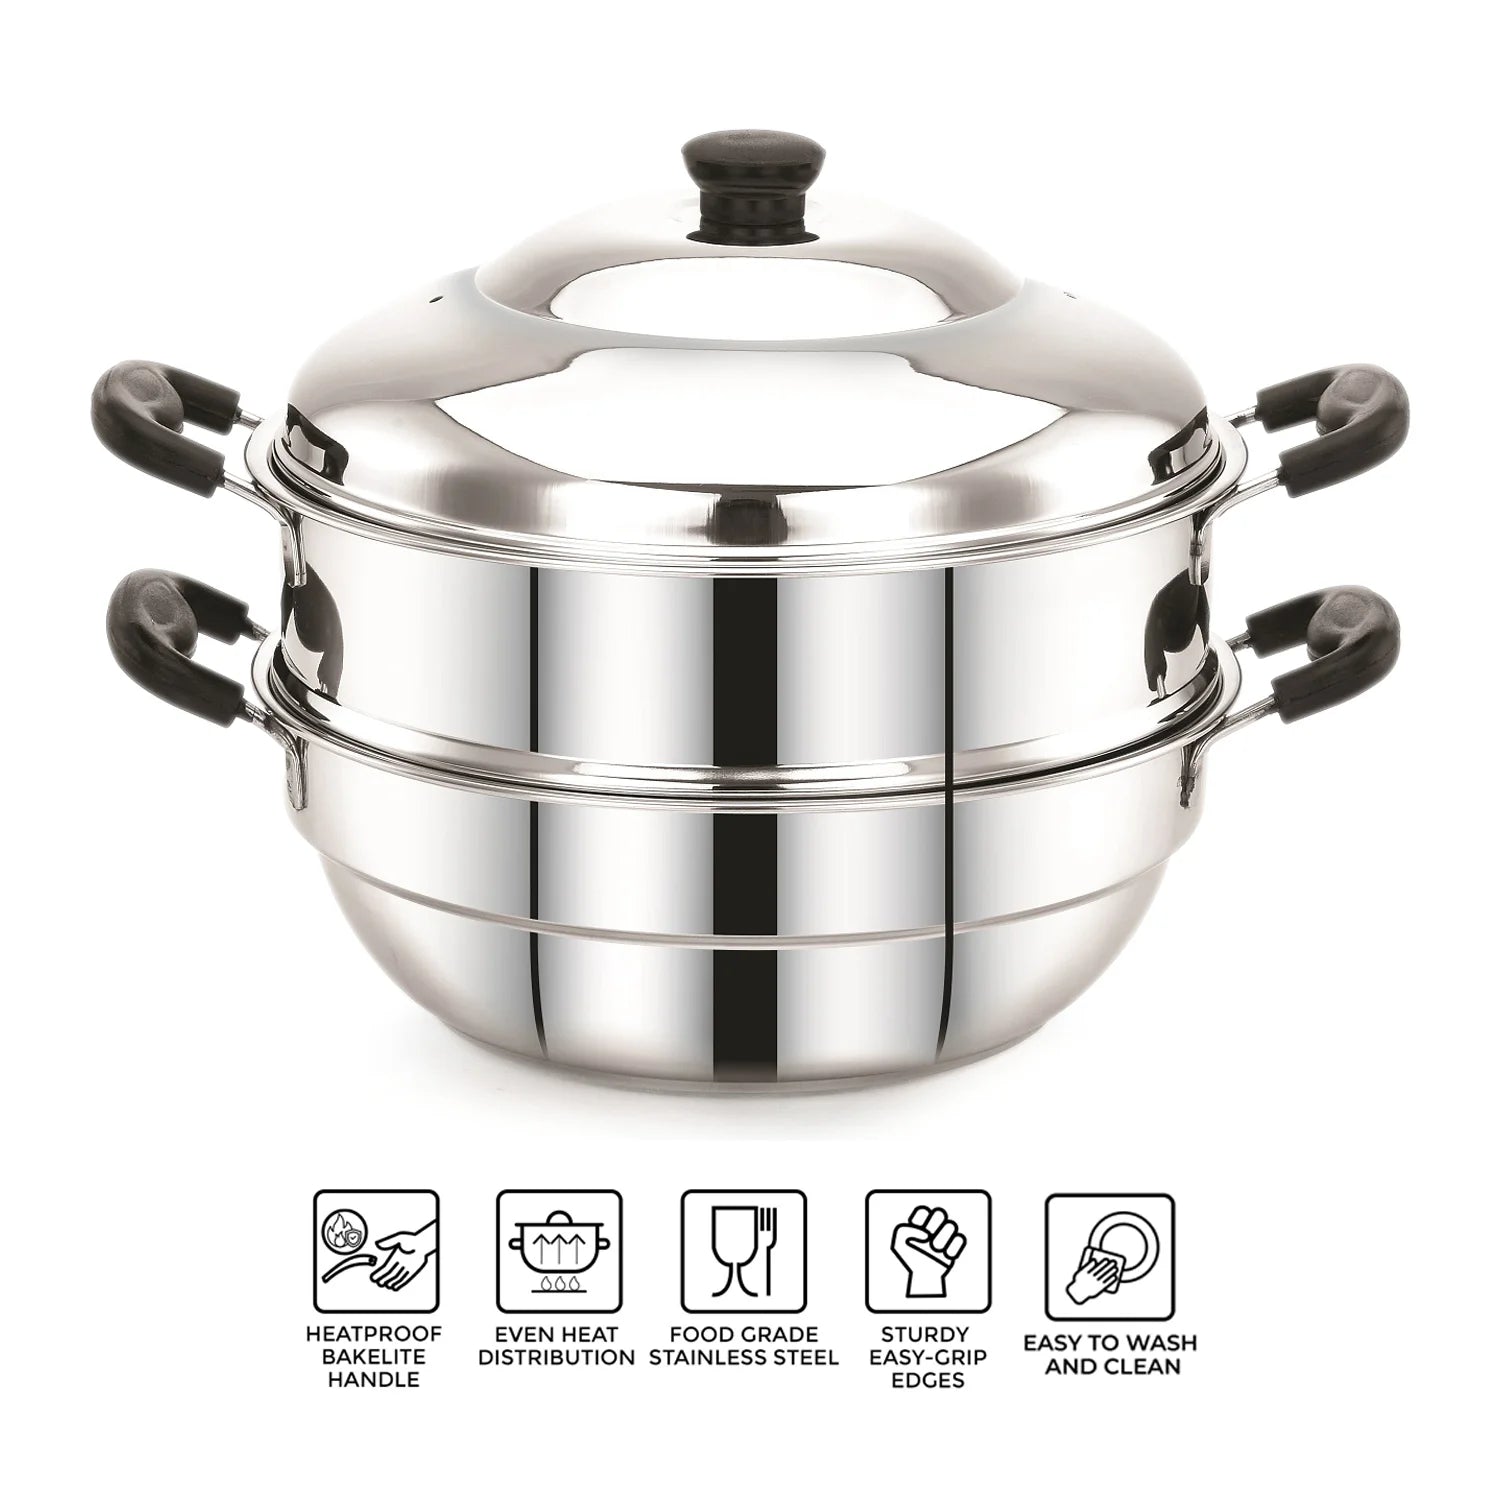 Avias Altroz stainless steel Idly pot with steamer | Idly cooker compatibility